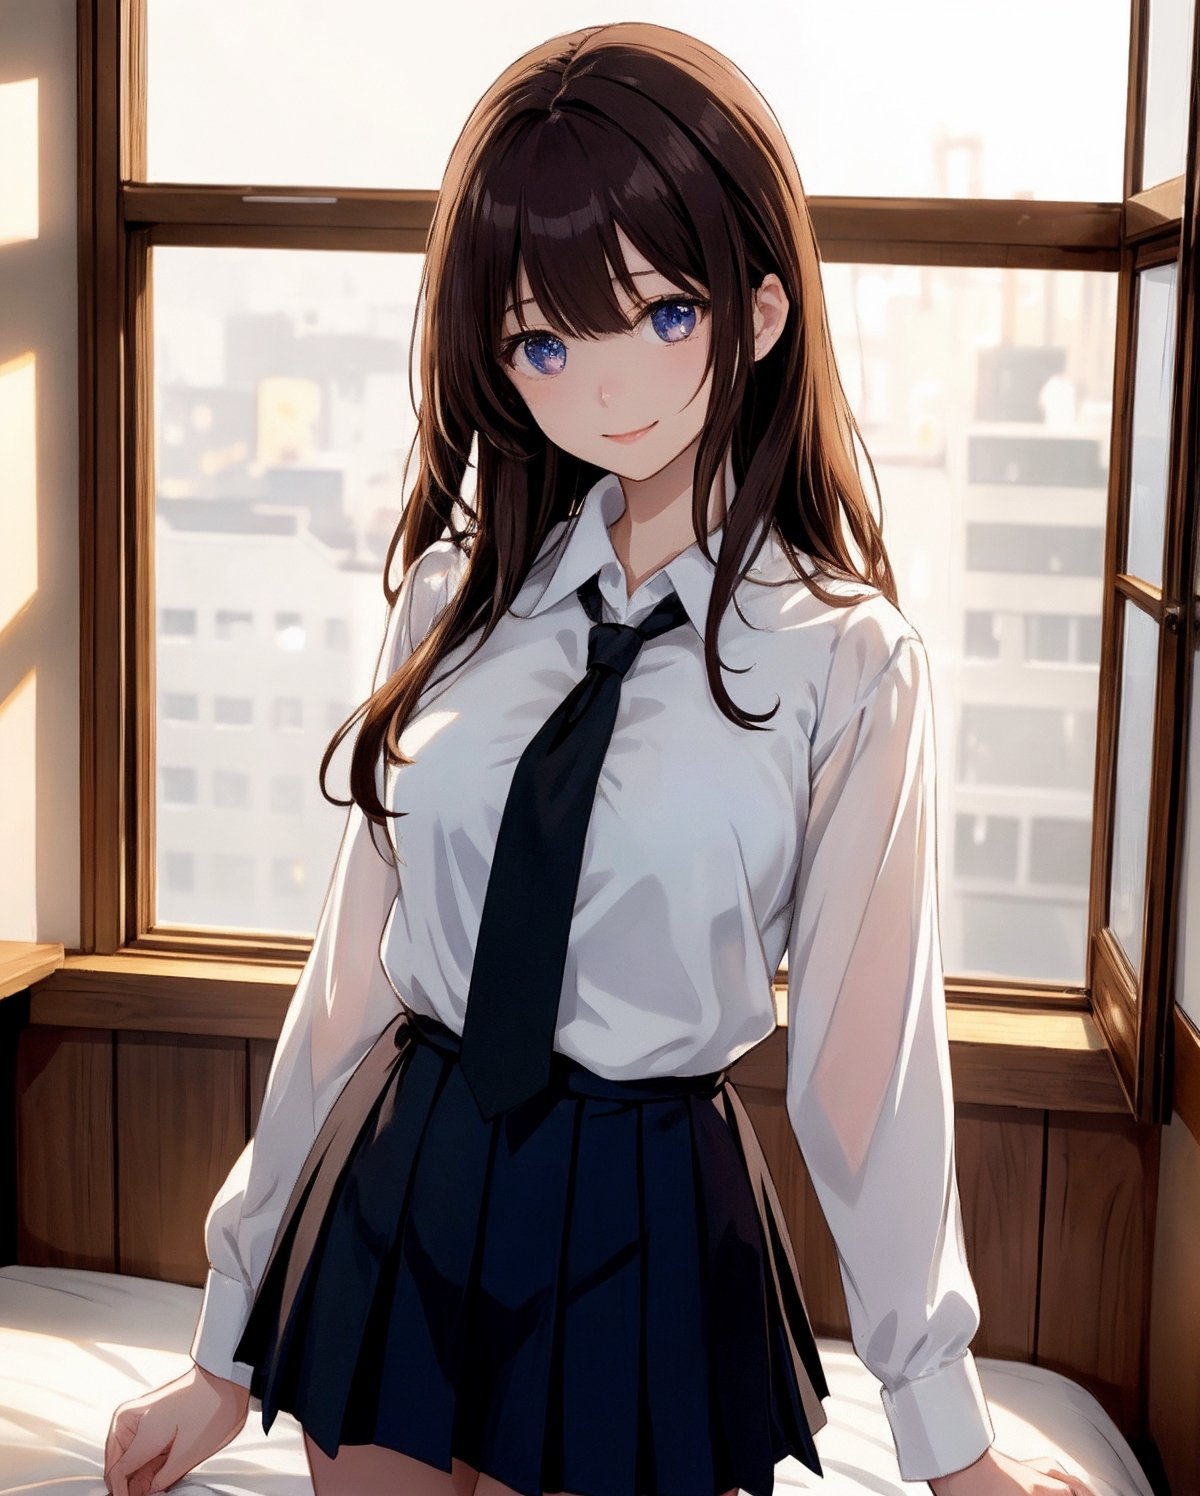 A beautiful Japanese anime girl with long straight brown hair and bangs, wearing a white blouse with a black ribbon tie and a pleated skirt, standing in a well-lit room with a bed and a window in the background. The girl has a cute and gentle smile with big, expressive eyes. Realistic anime style, high detail, soft lighting, bokeh background.
,anime